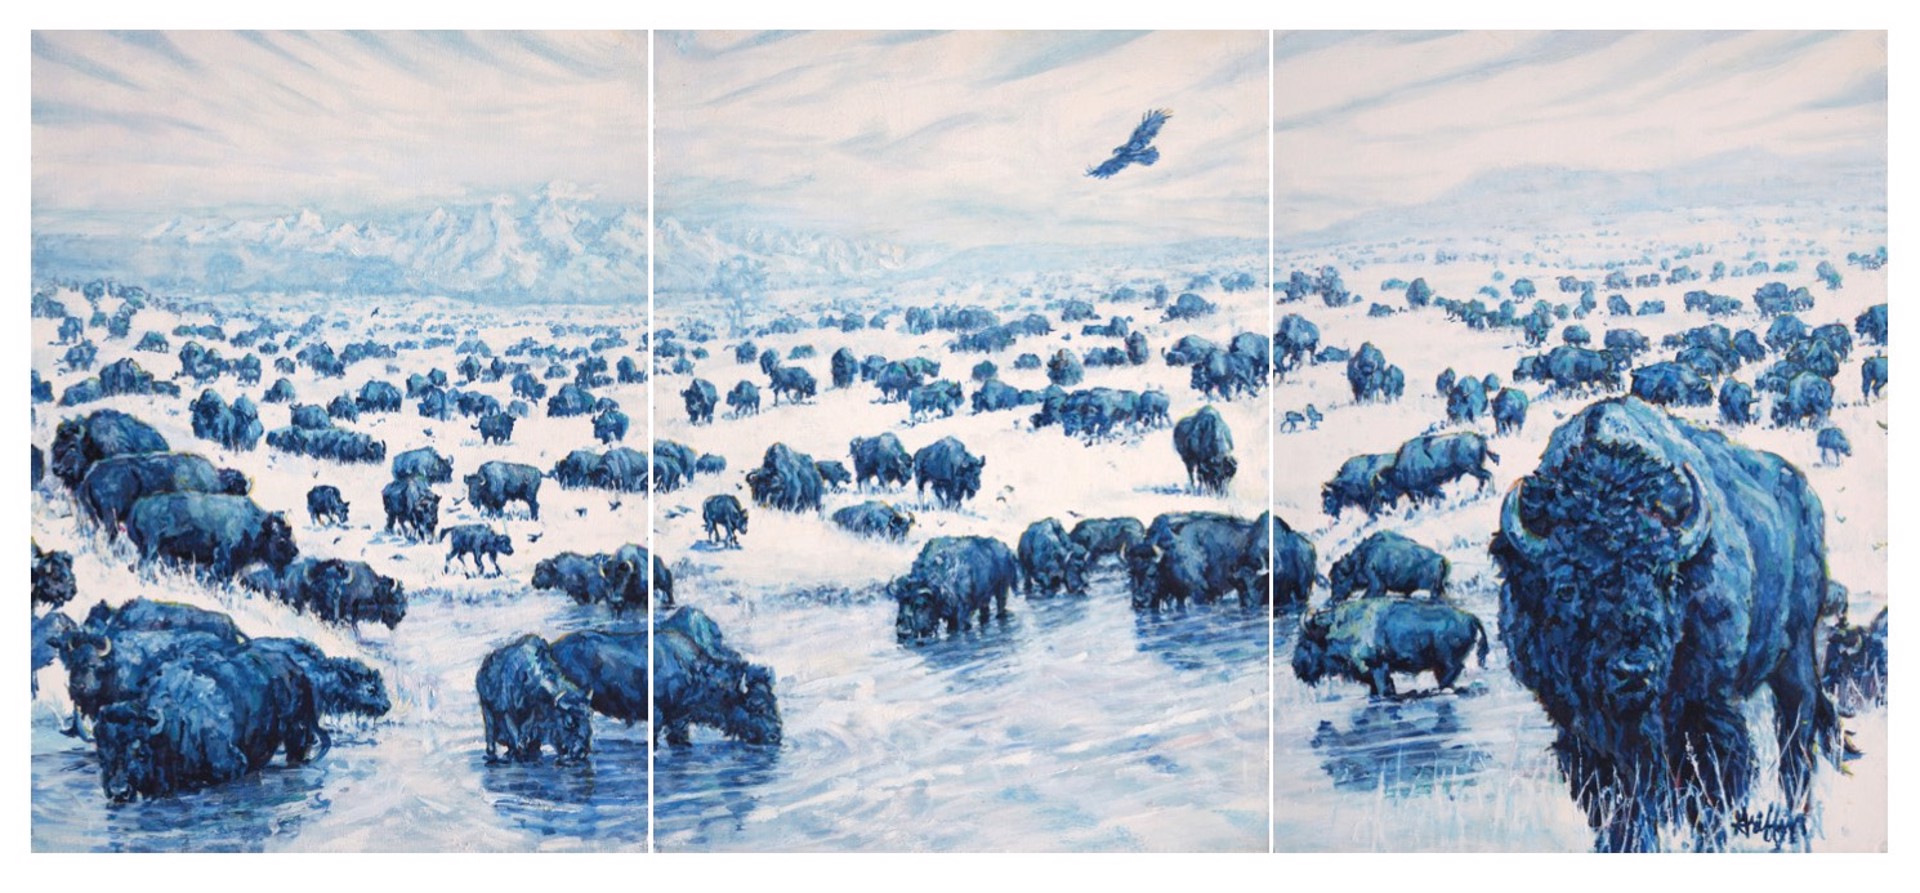 Original Oil Painting Triptych Featuring Bison In Impressionist Style Across Landscape With Water In Foreground And Mountains In Background In Blue Tint